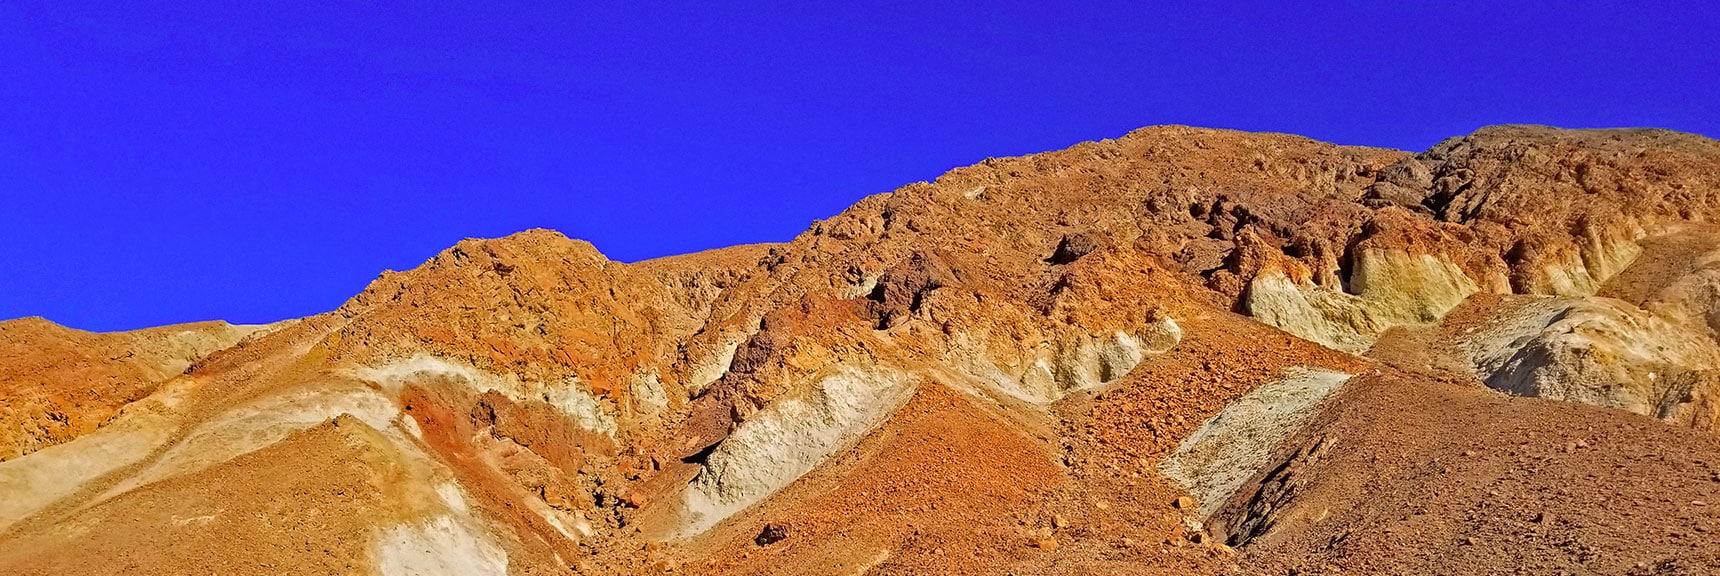 Colors in the Hills Above Indicate Various Minerals: Red is Iron, White is Manganese, Green is Copper. | Golden Canyon to Zabriskie Point | Death Valley National Park, California